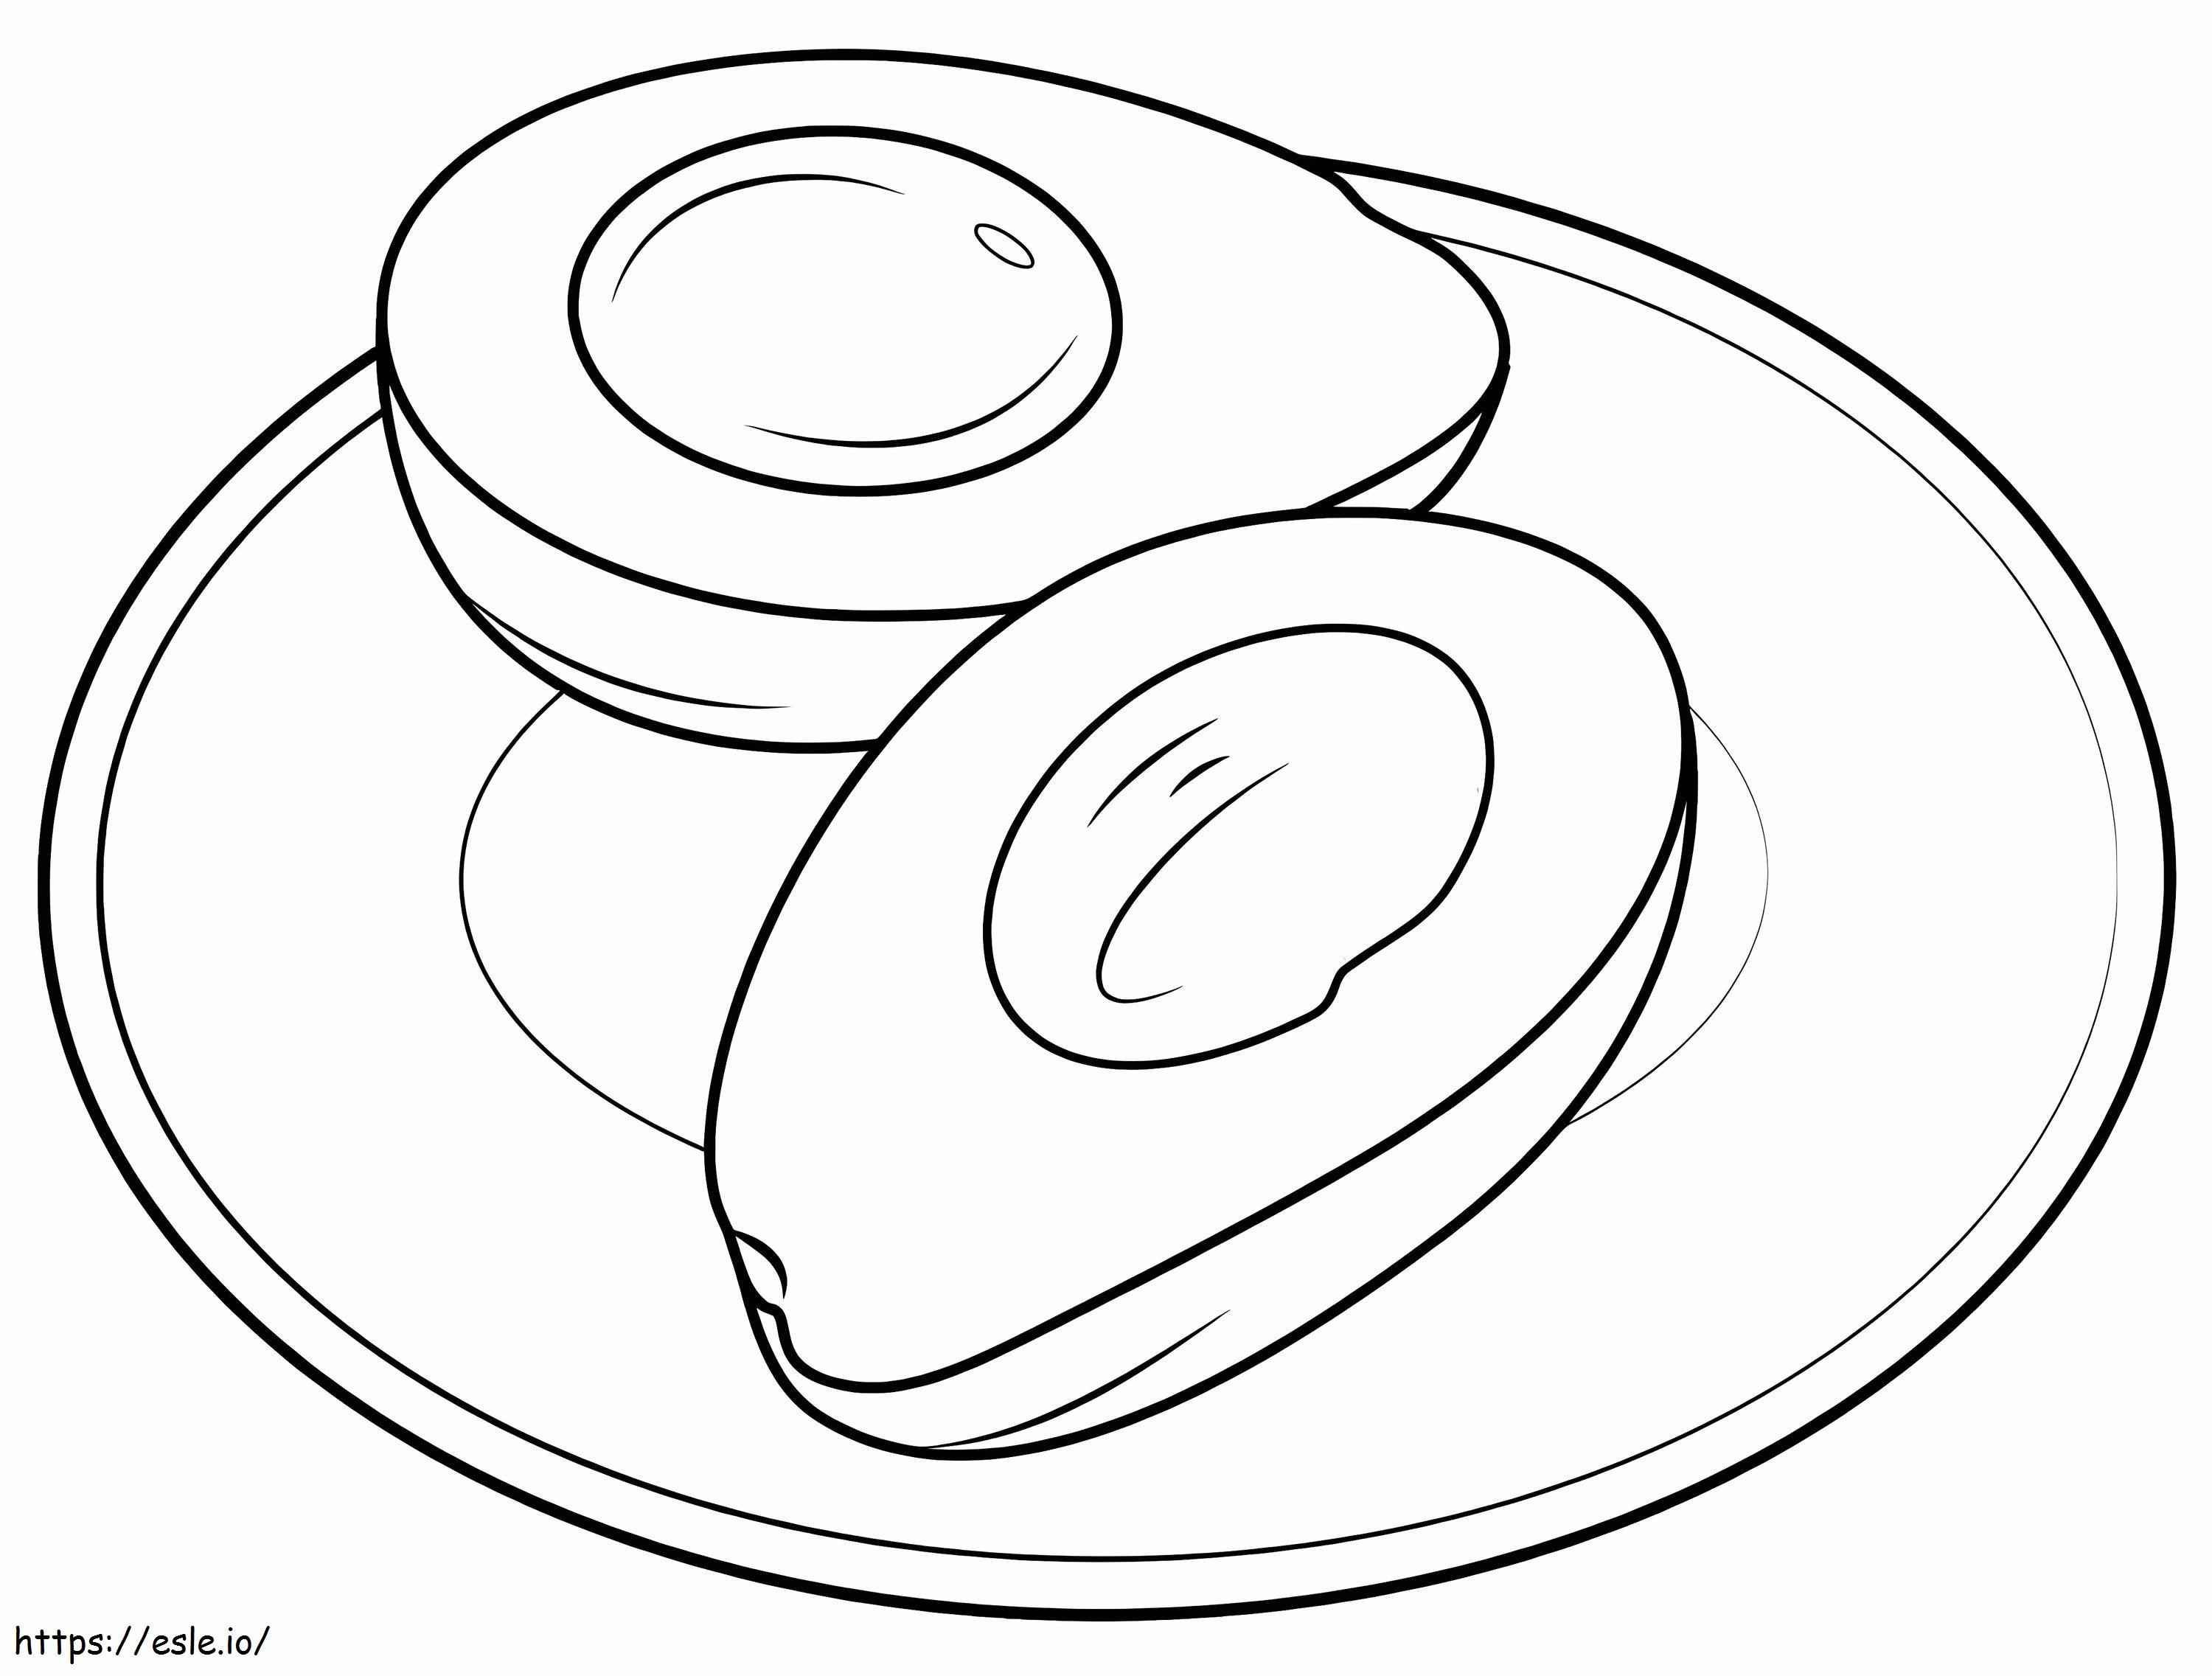 Avocado On A Plate coloring page